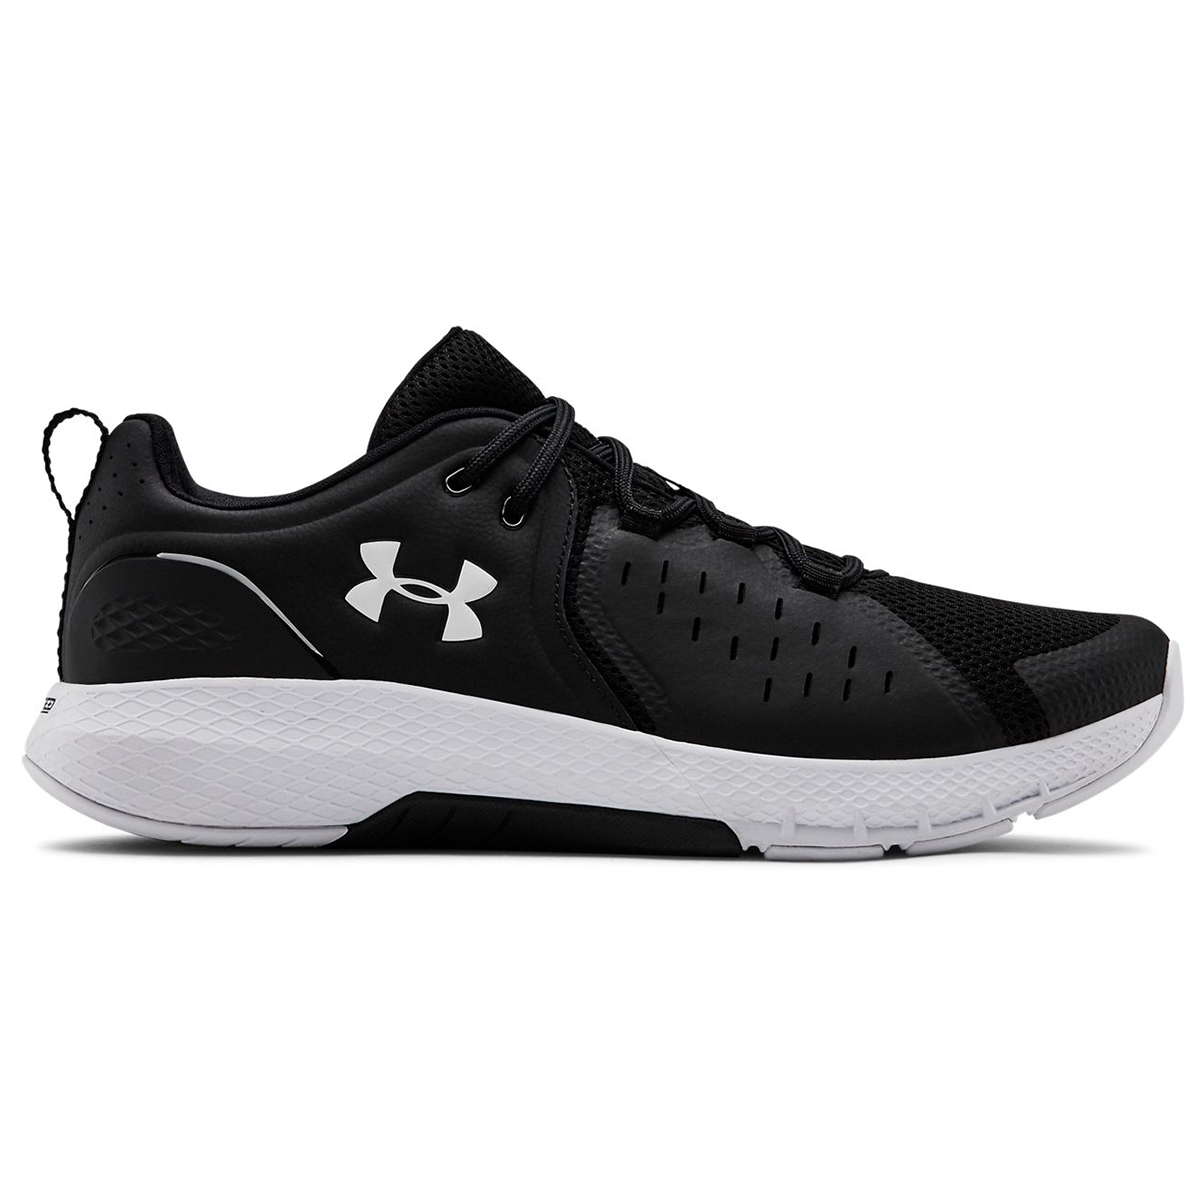 Under Armour Men's Charge Commit Running Shoes - Black, 9